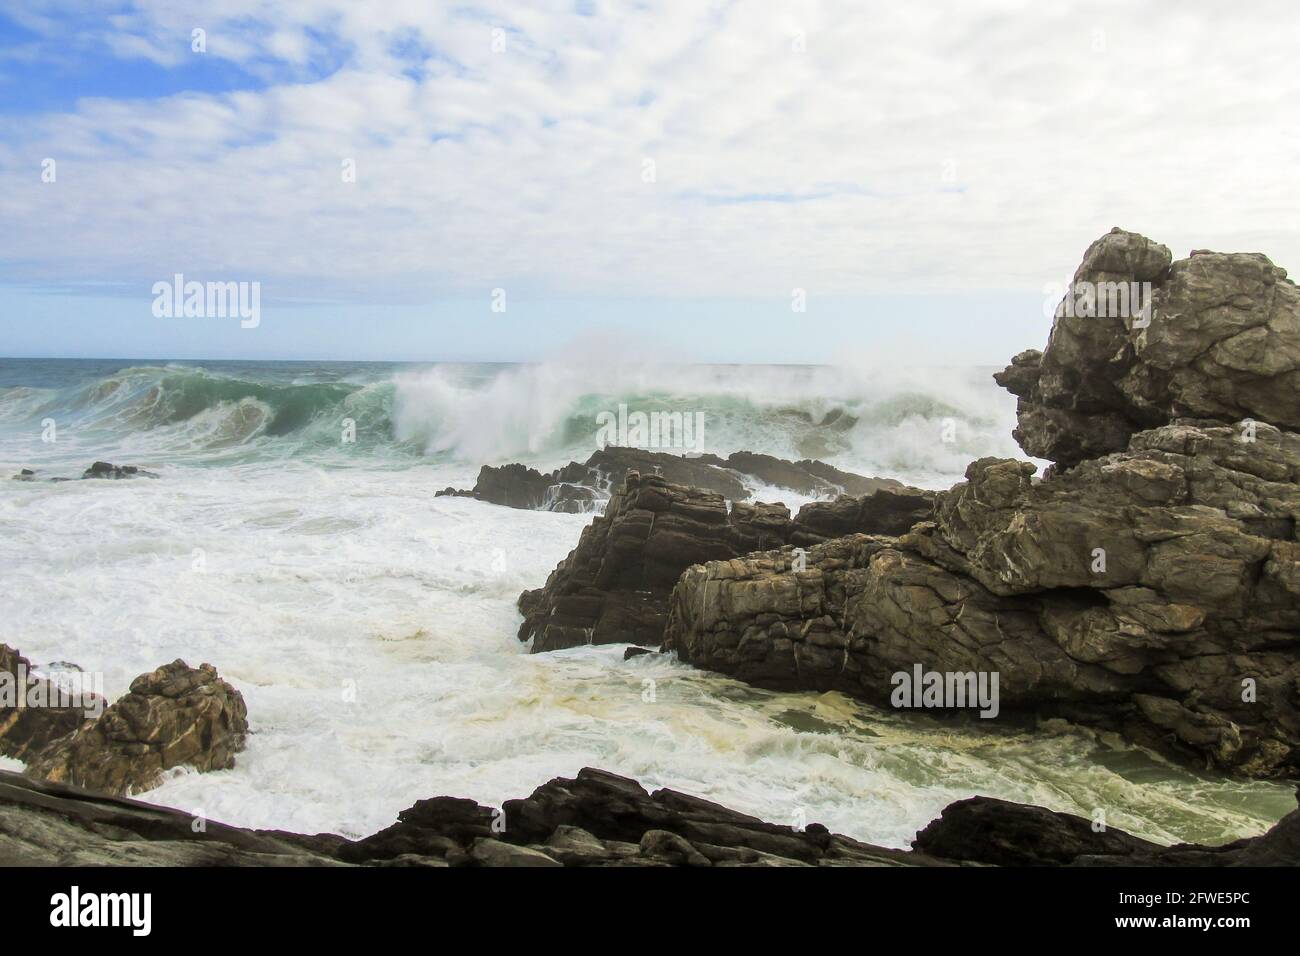 A rough tempestuous ocean along the rocky coastline of the Tsitsikamma Section of the Garden Route National Park in South Africa. Stock Photo